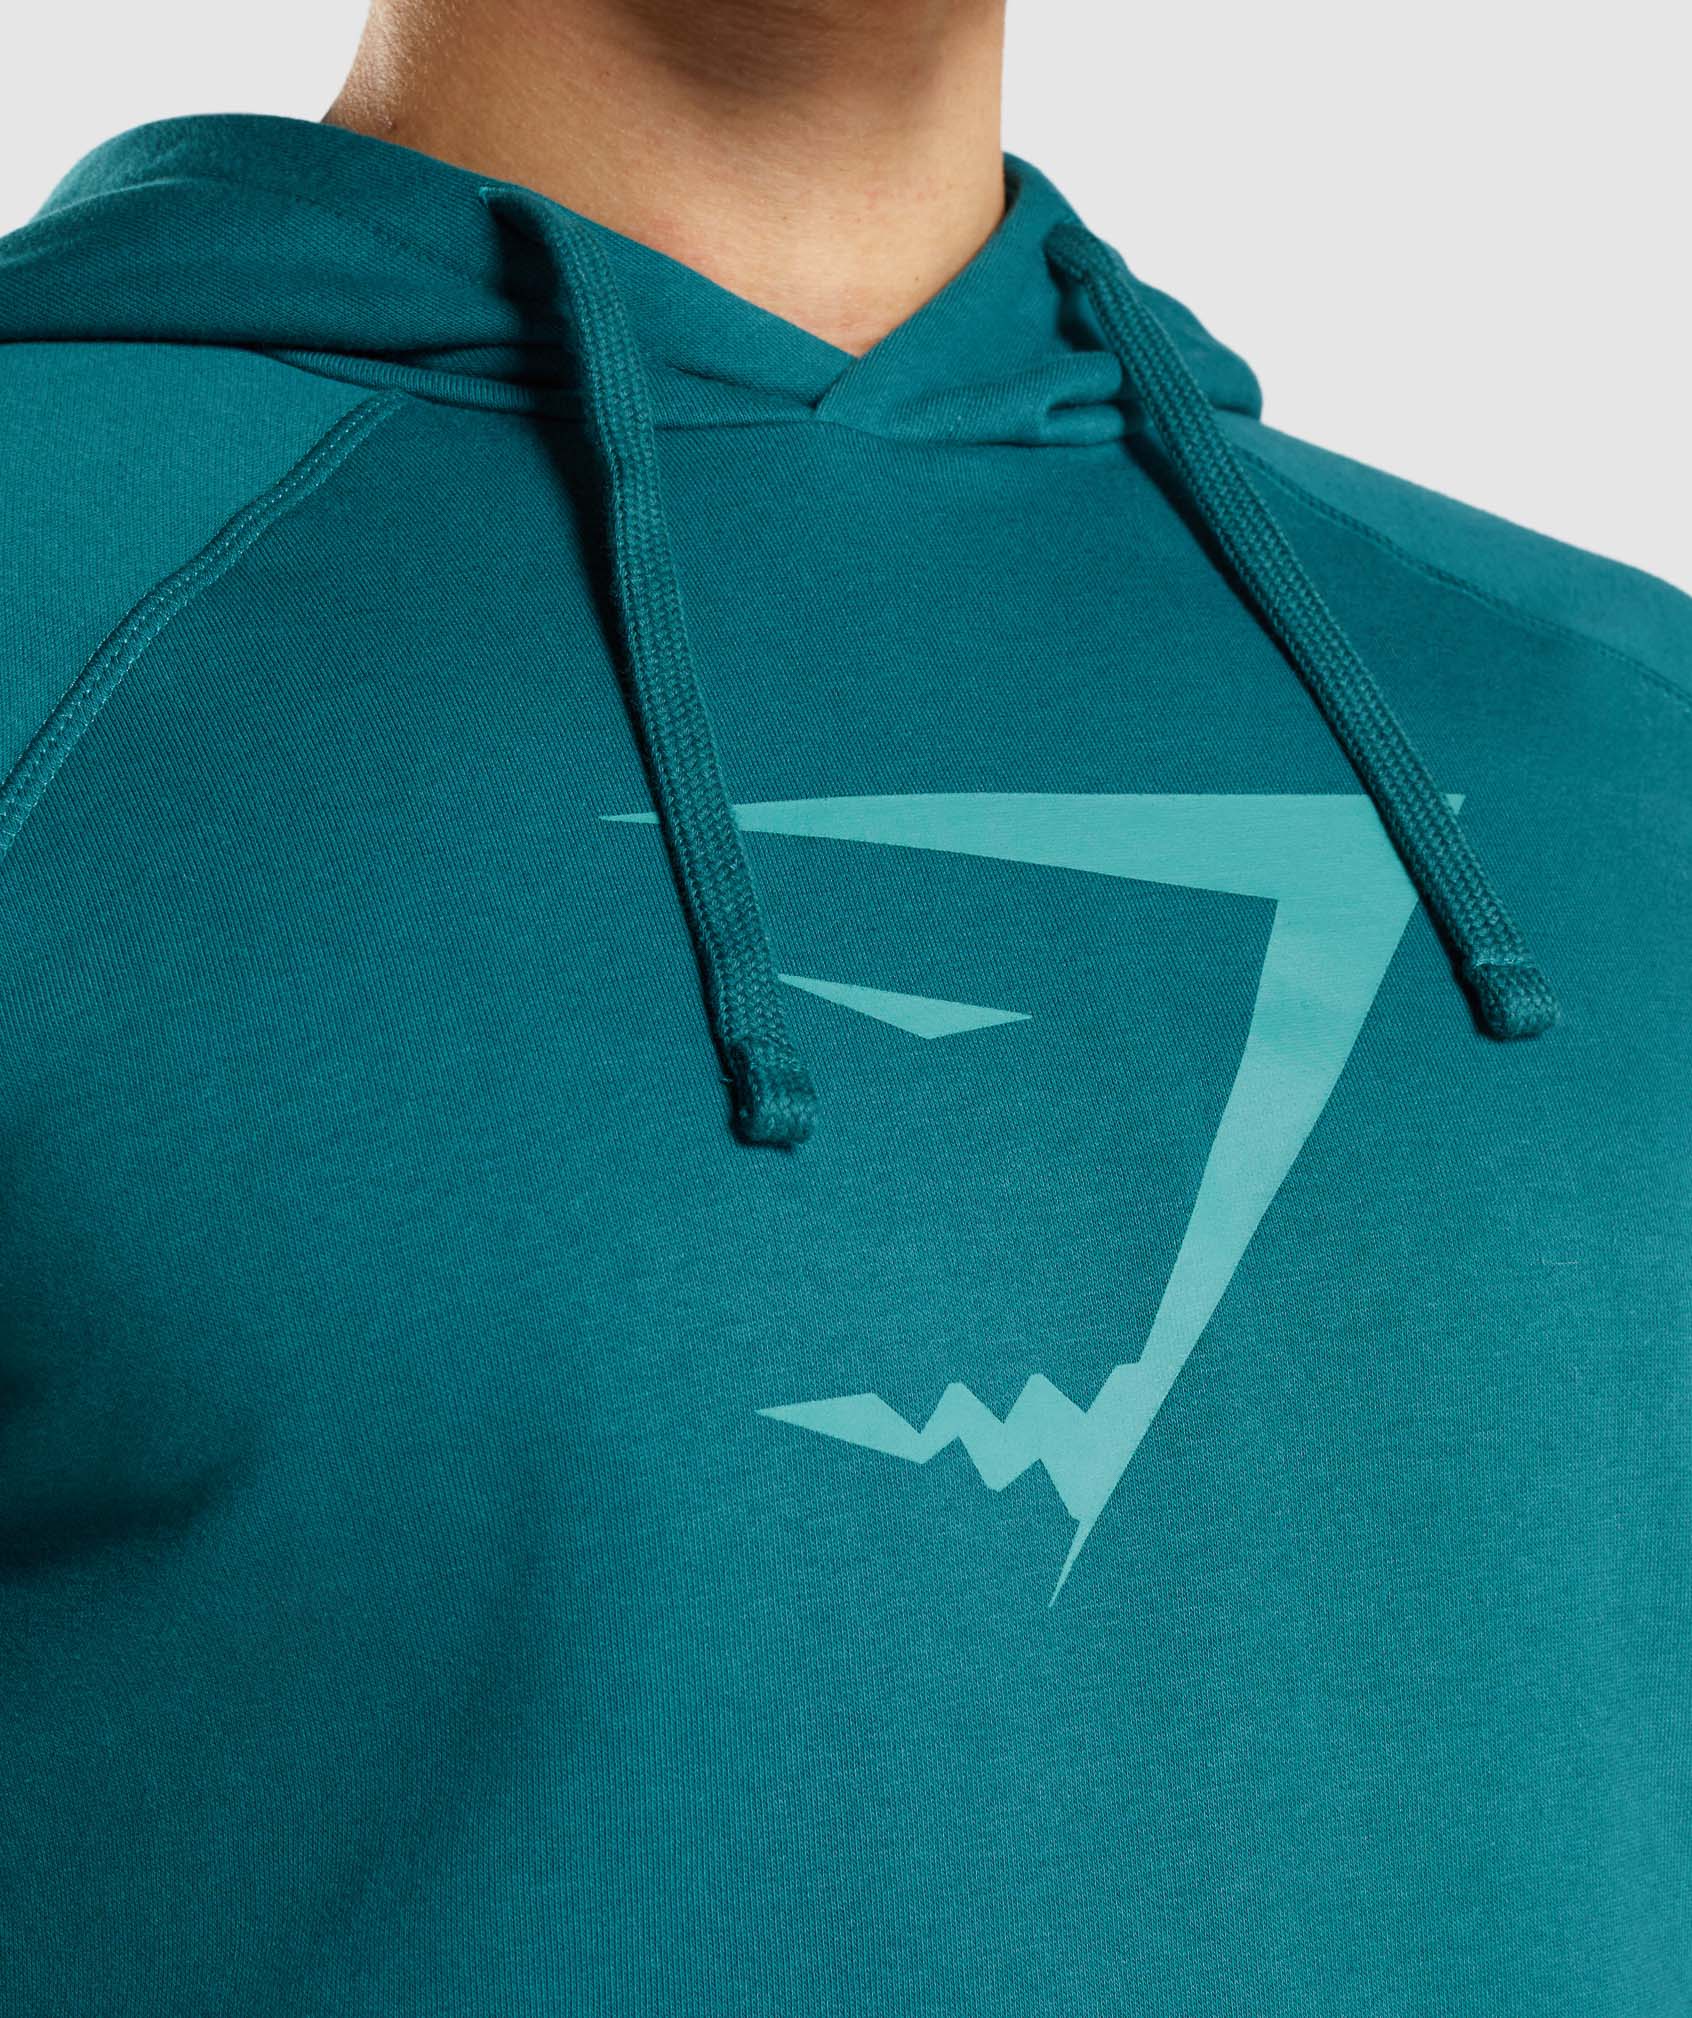 Sharkhead Infill Hoodie in Teal - view 5